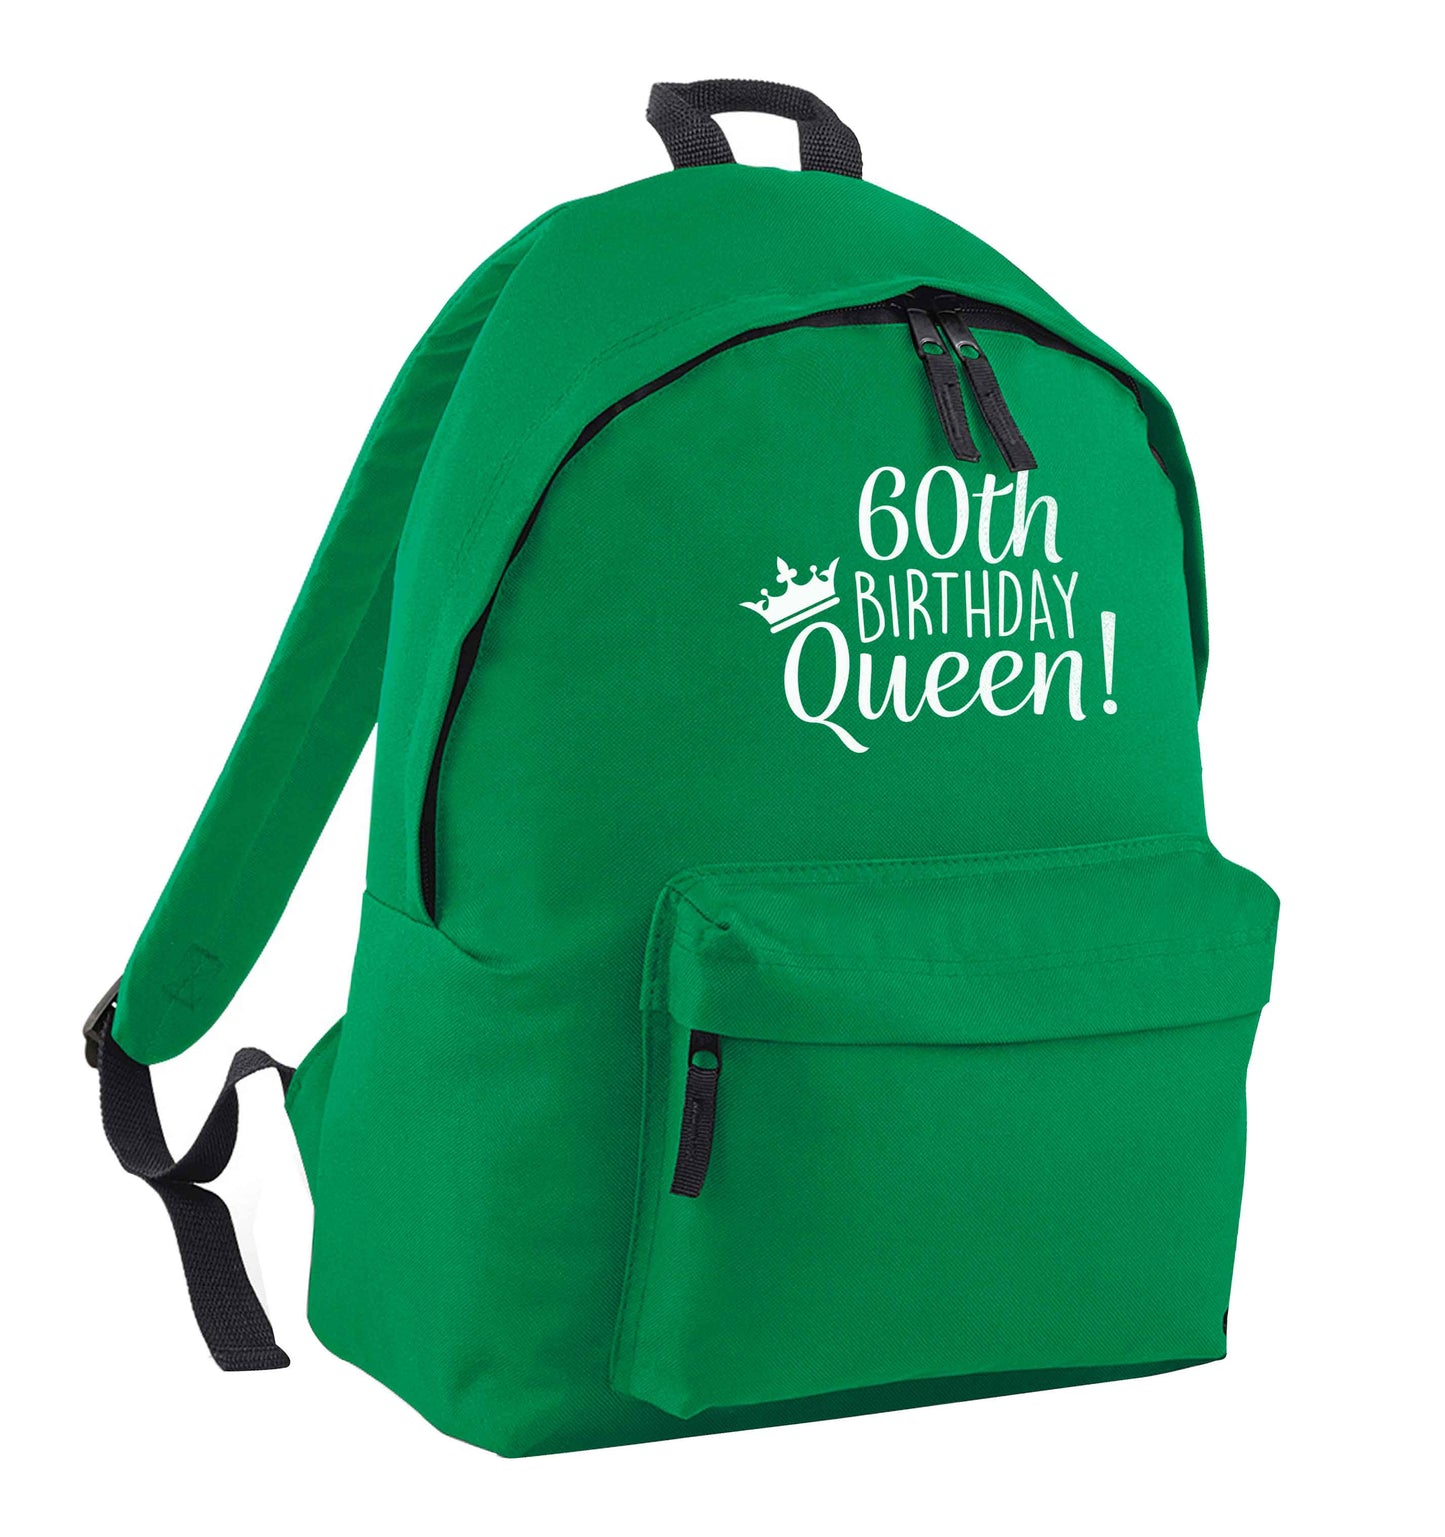 60th birthday Queen green adults backpack